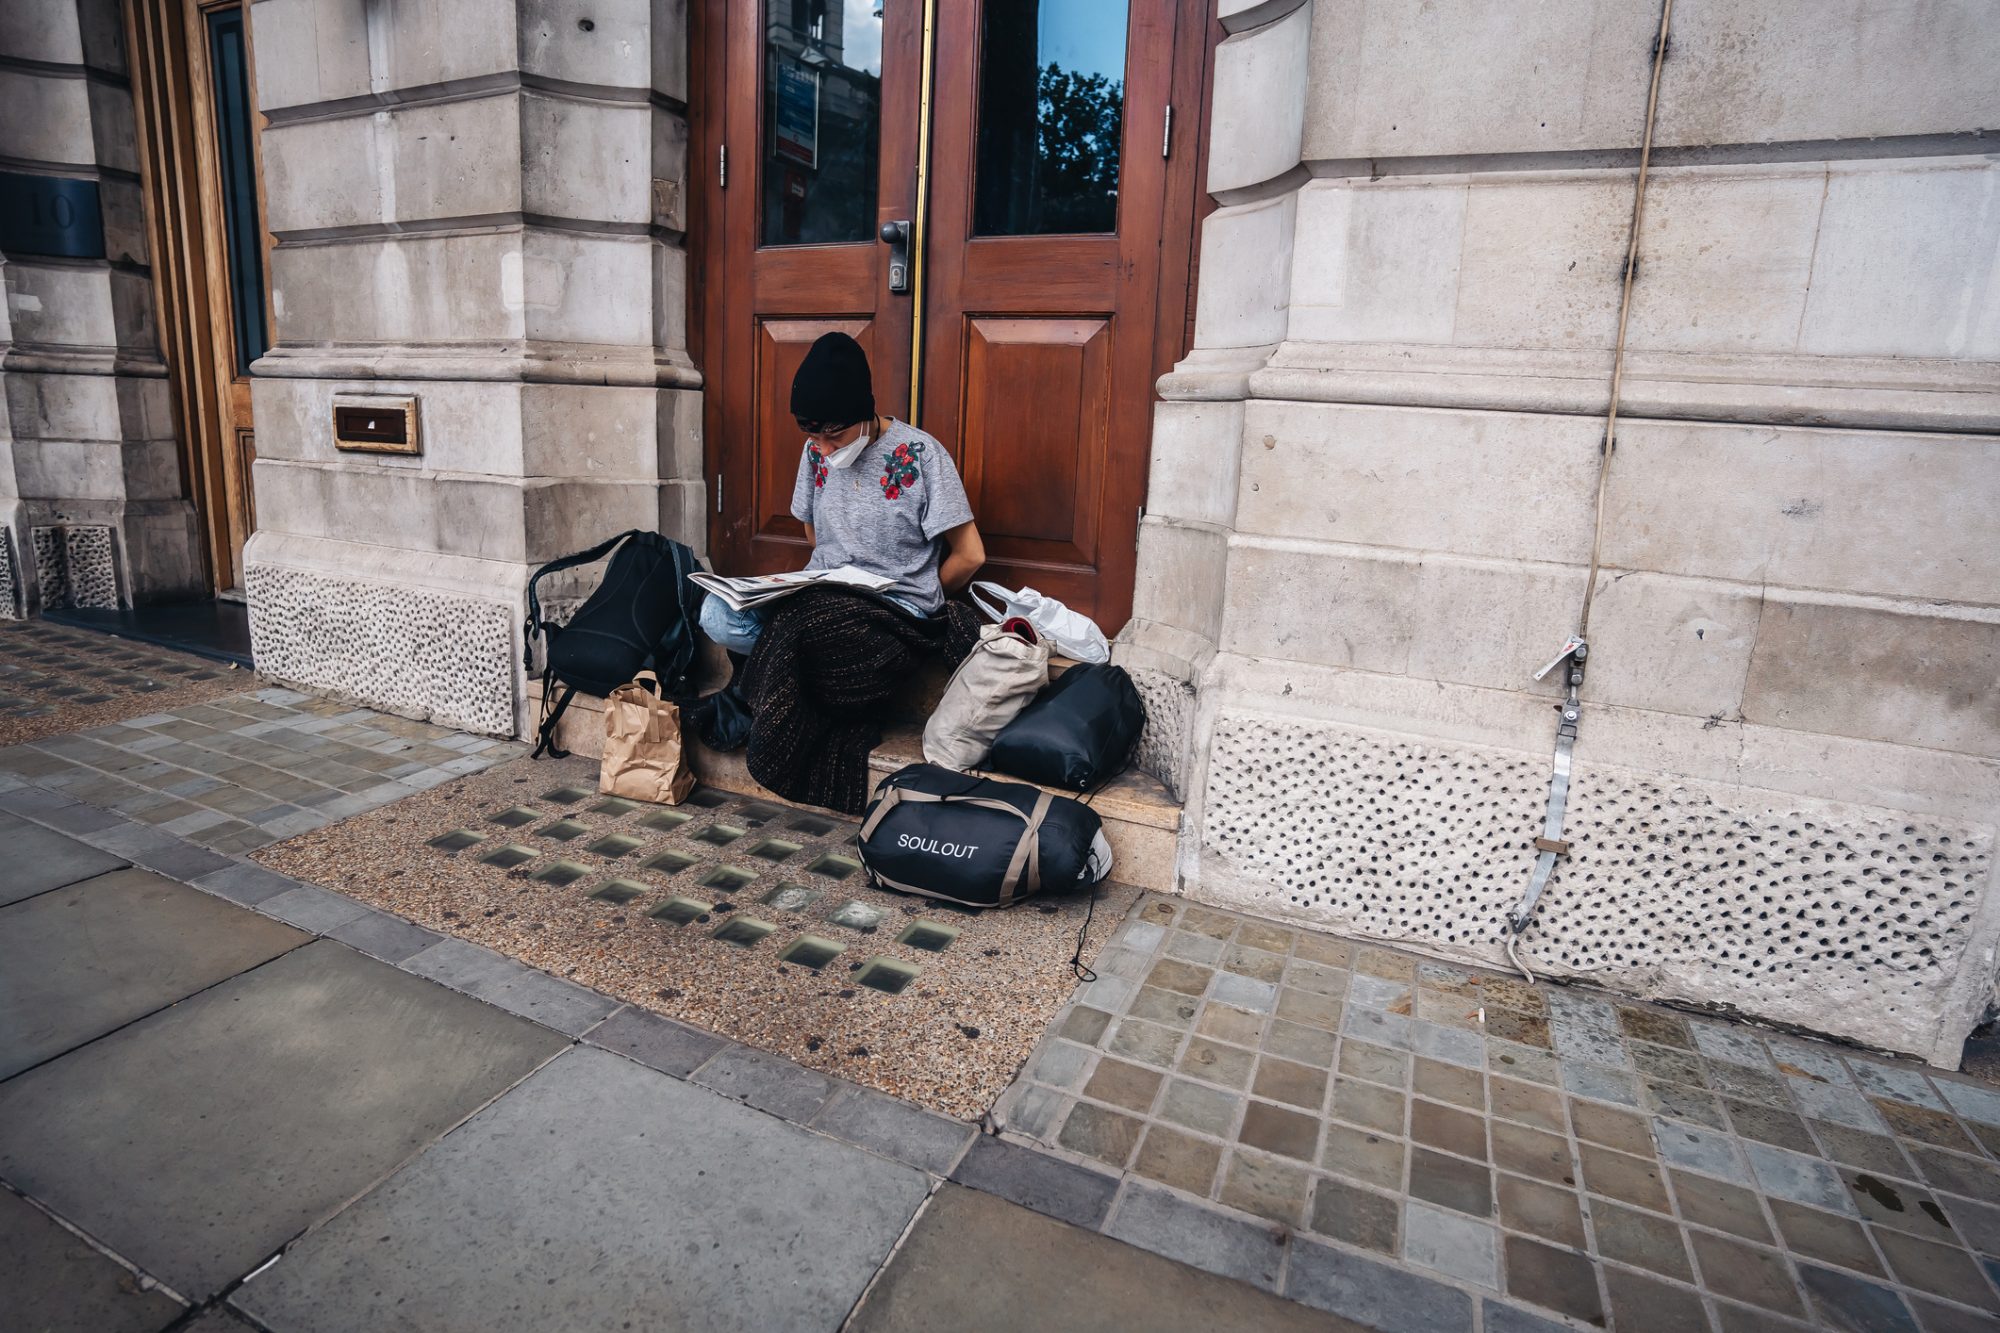 Homeless lady sitting on the pavement in the UK due to housing crisis